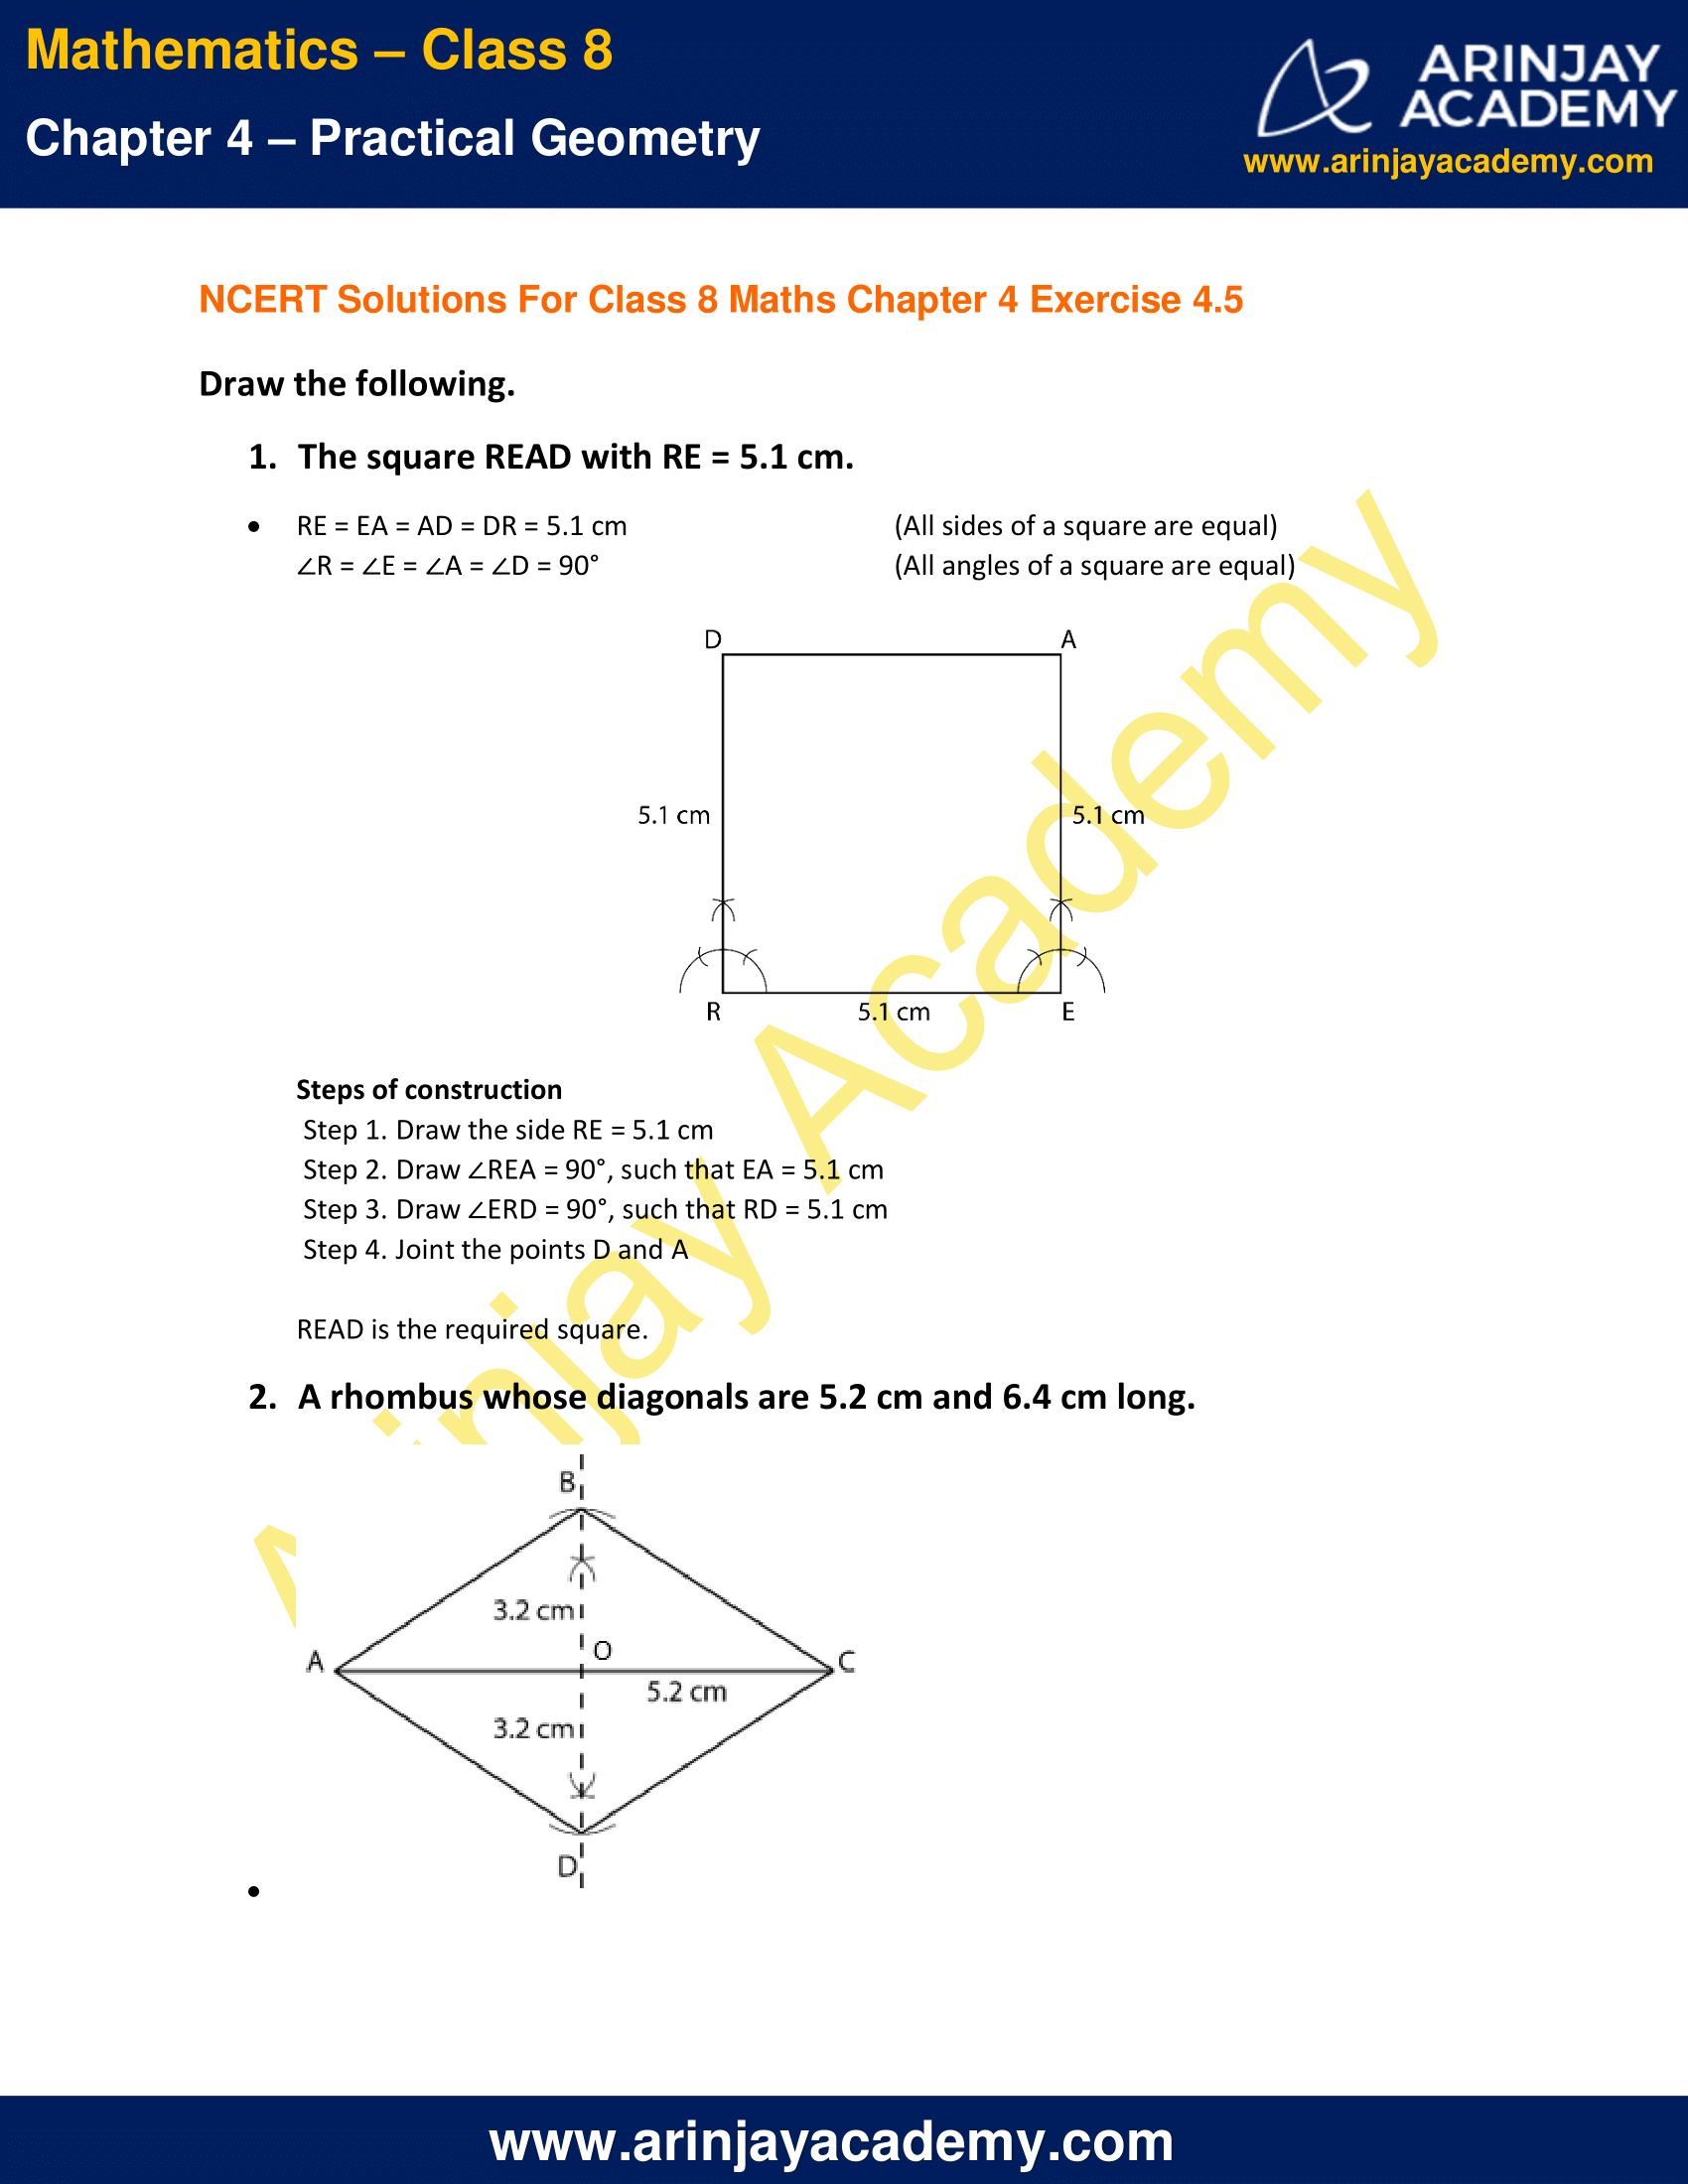 NCERT Solutions for Class 8 Maths Chapter 4 Exercise 4.5 image 1